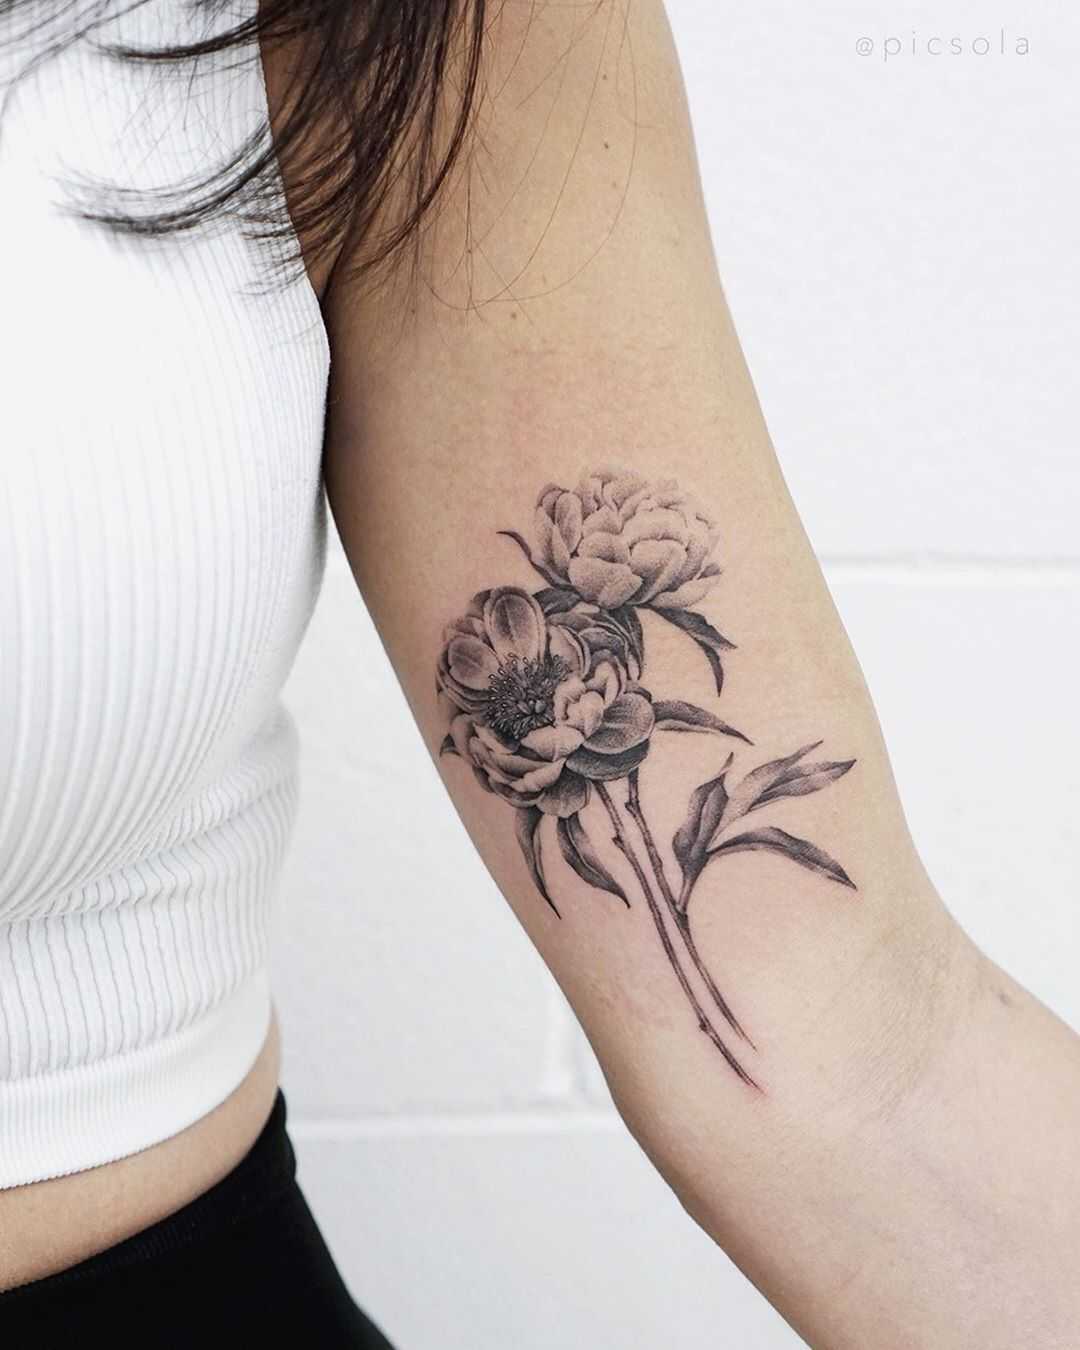 Black and grey flowers by tattooist picsola